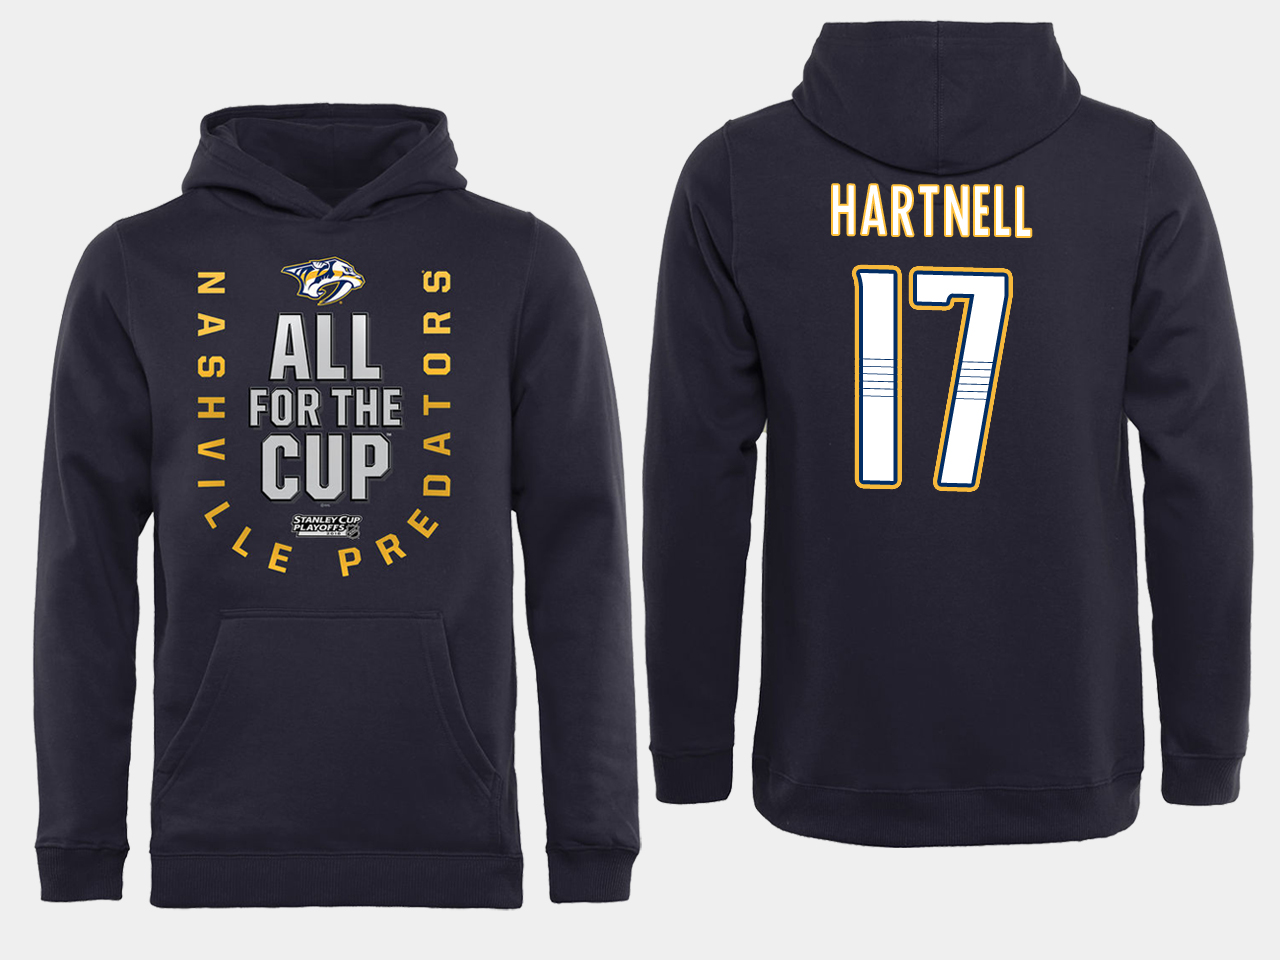 Men NHL Adidas Nashville Predators #17 Hartnell black ALL for the Cup hoodie